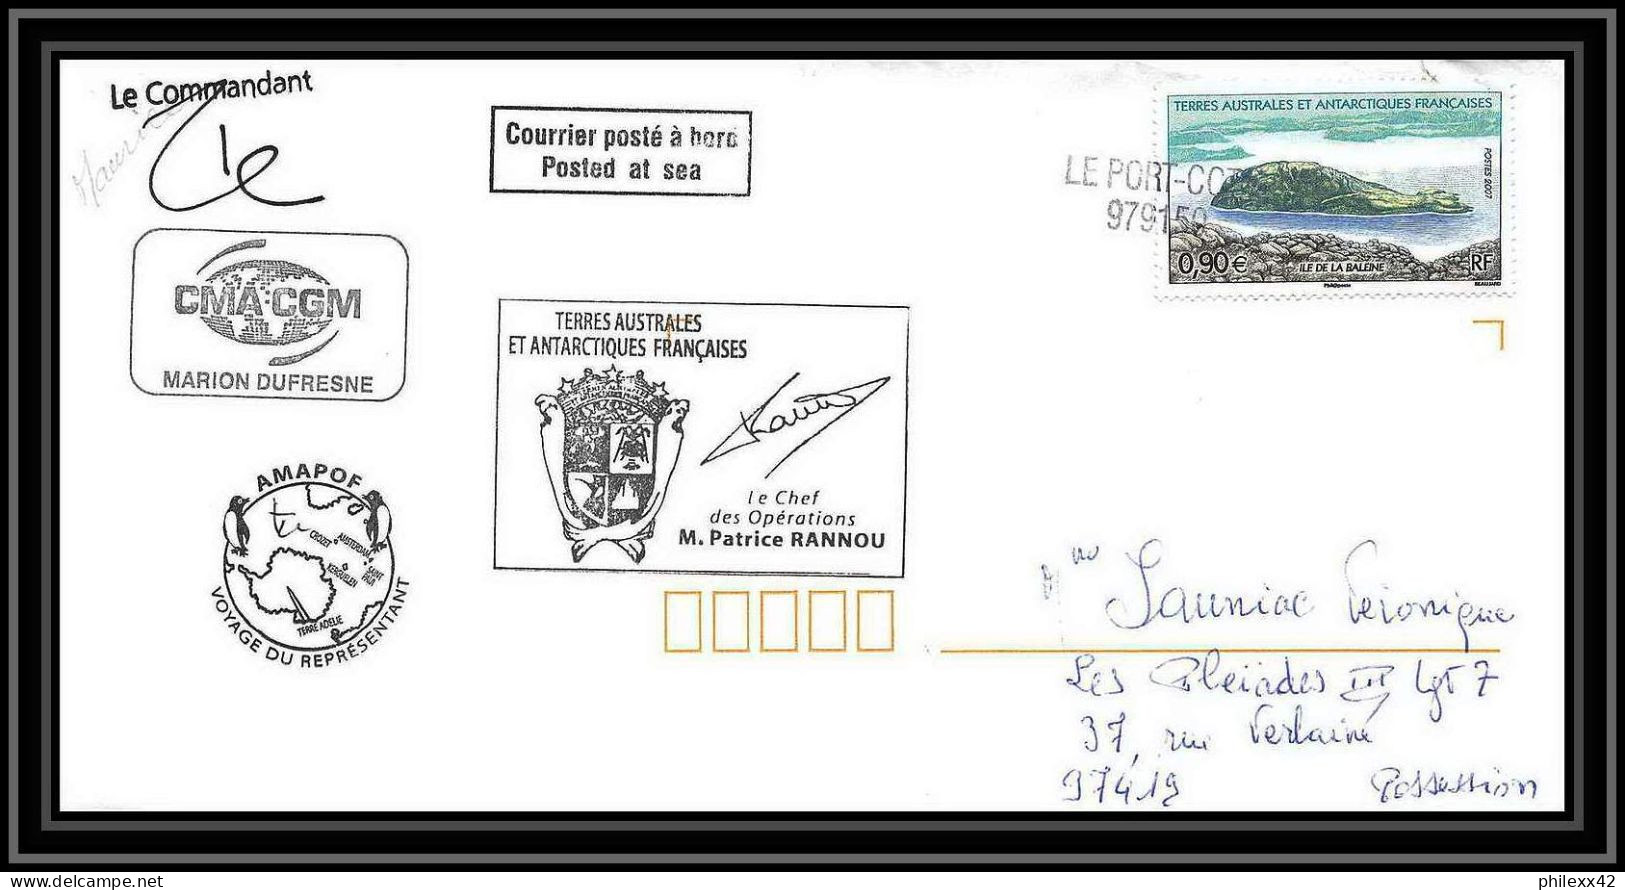 2716 ANTARCTIC Terres Australes (taaf) Dufresne 2 Signé Signed Op 2007/2 Maurice (mauritus) Helilagon Voyage Pilloton - Expediciones Antárticas